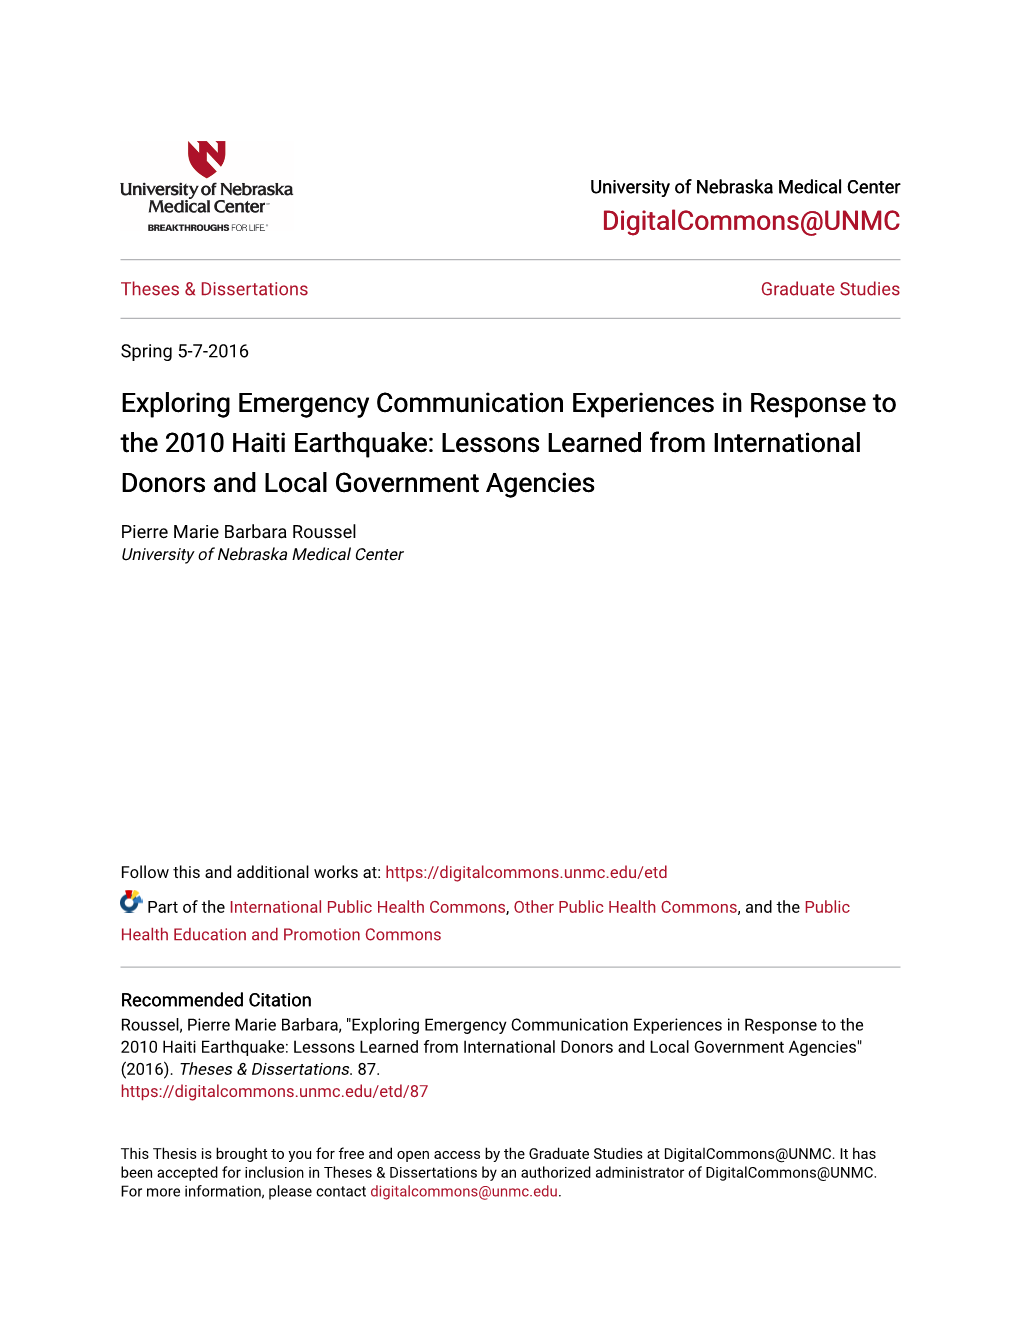 Exploring Emergency Communication Experiences in Response to the 2010 Haiti Earthquake: Lessons Learned from International Donors and Local Government Agencies